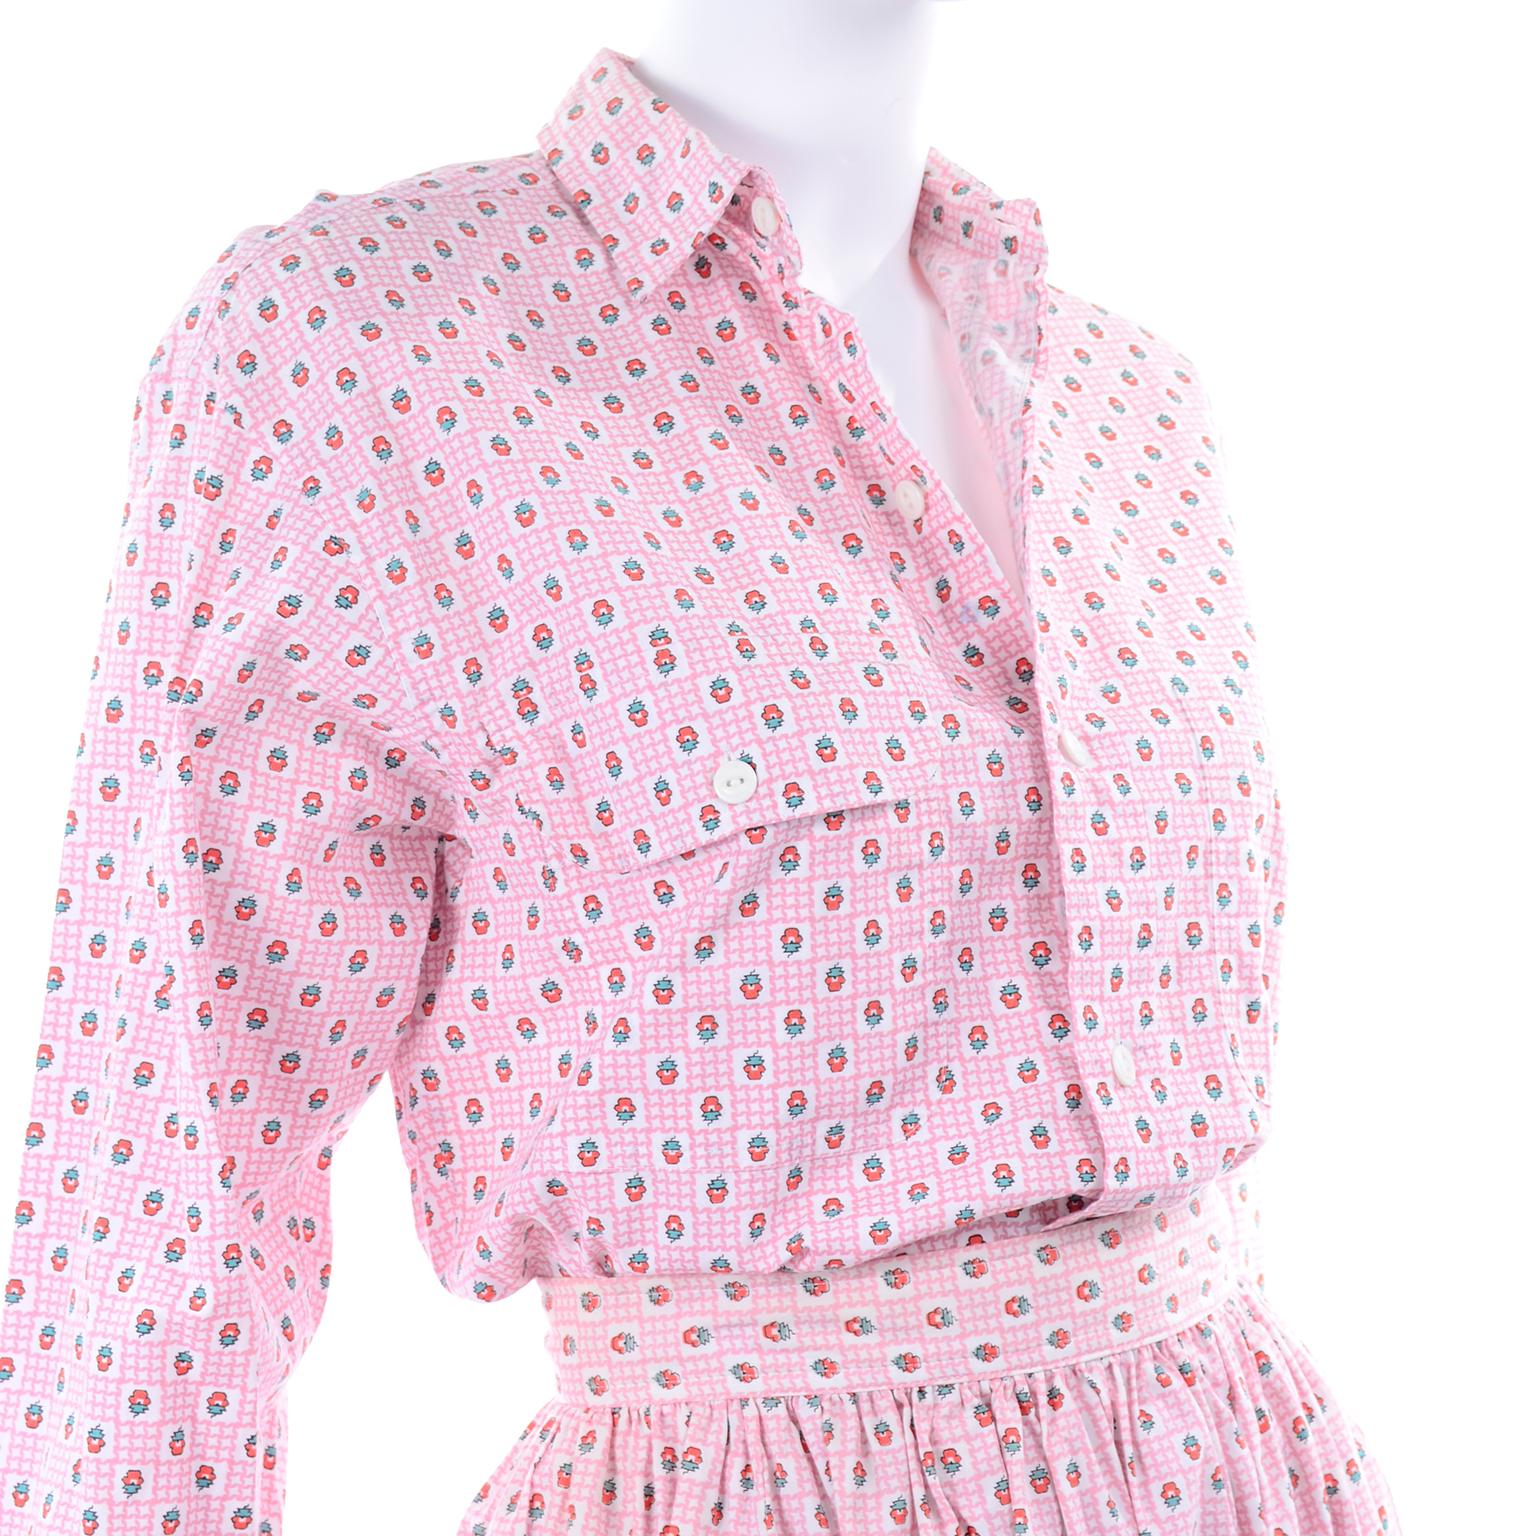 Deadstock New w Tags Vintage Ralph Lauren Pink Floral 2 pc Dress Skirt & Blouse For Sale 2